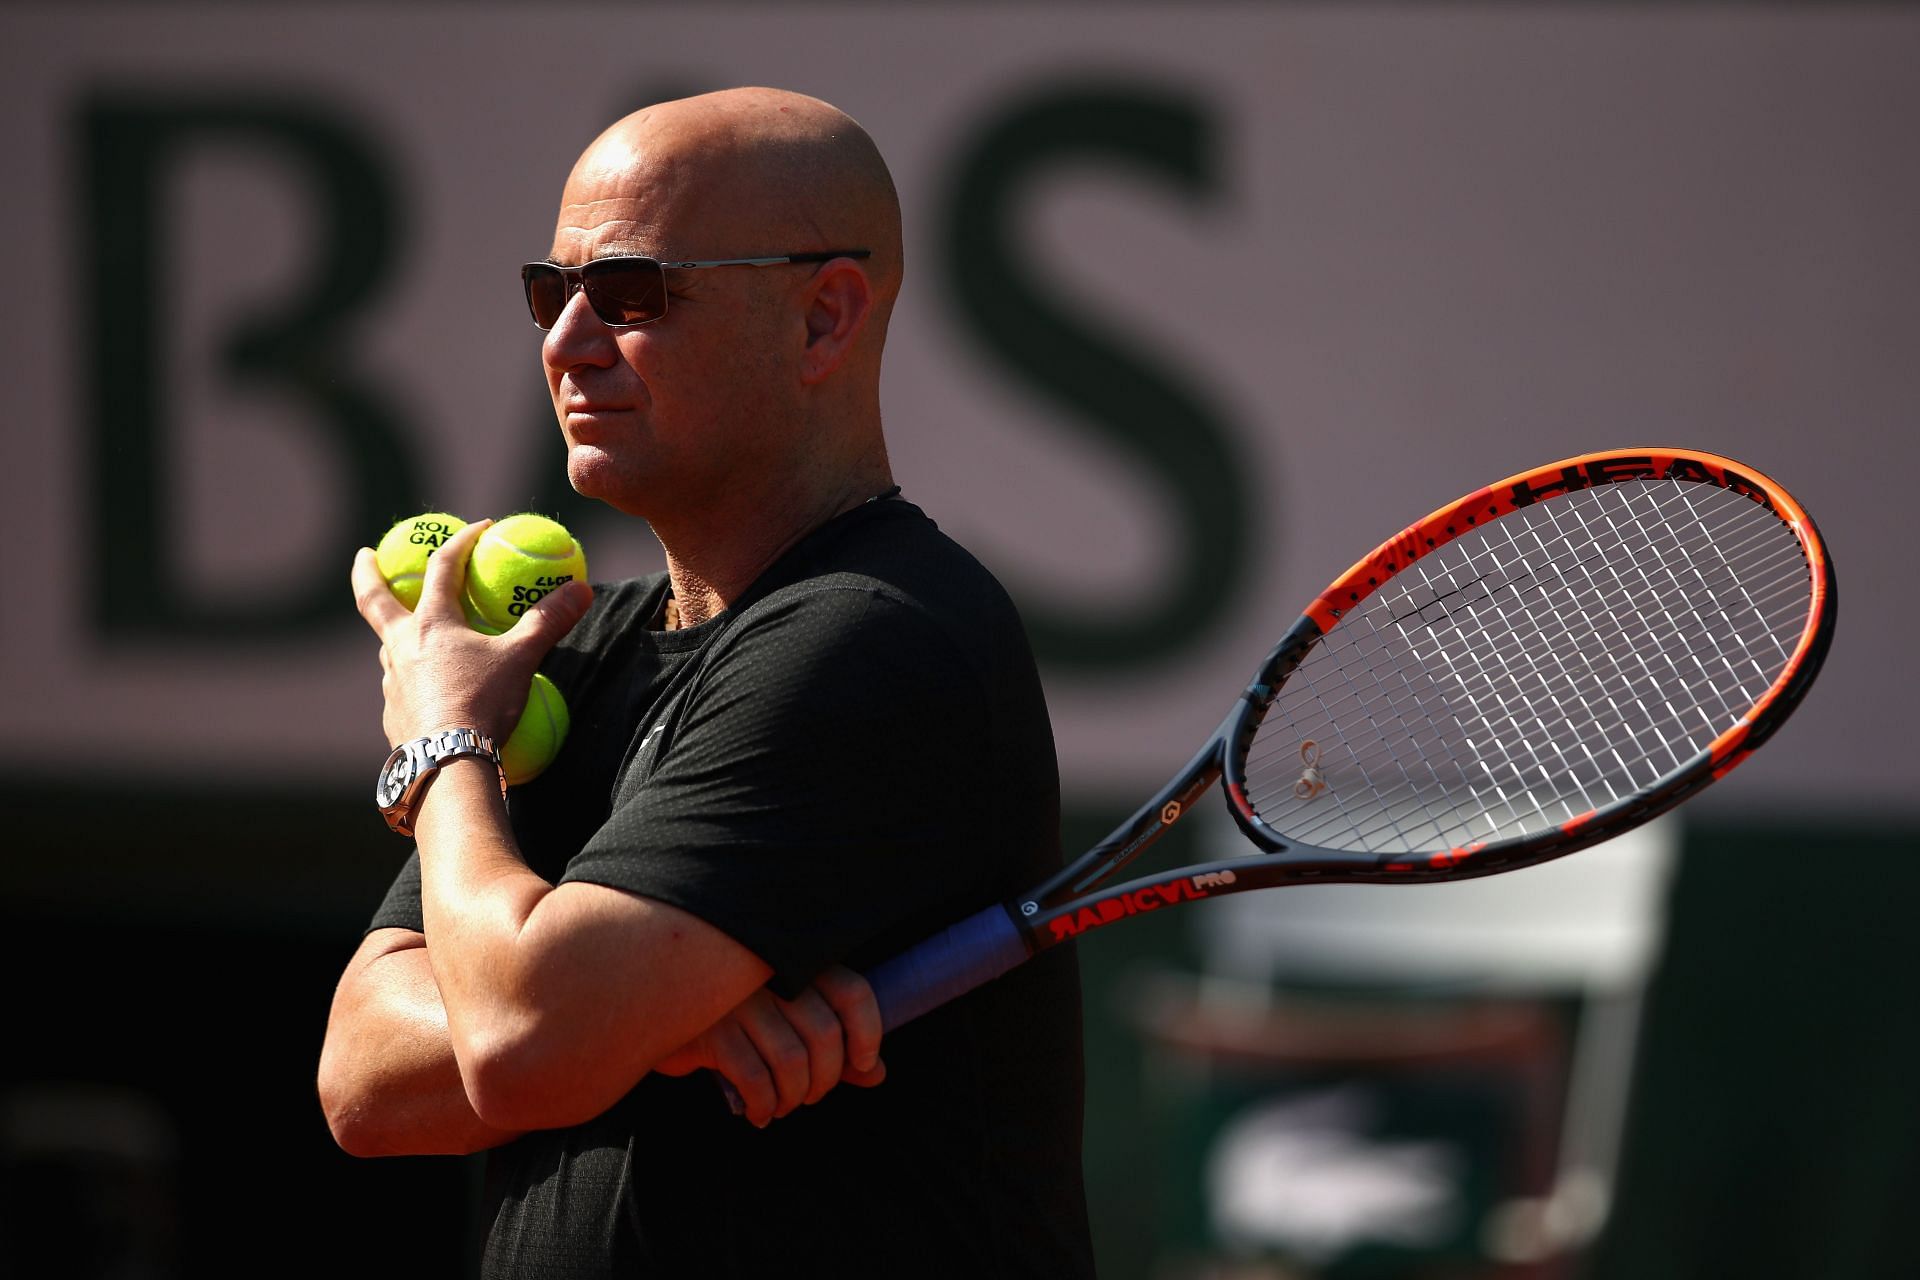 Andre Agassi will play in his first pickleball event.